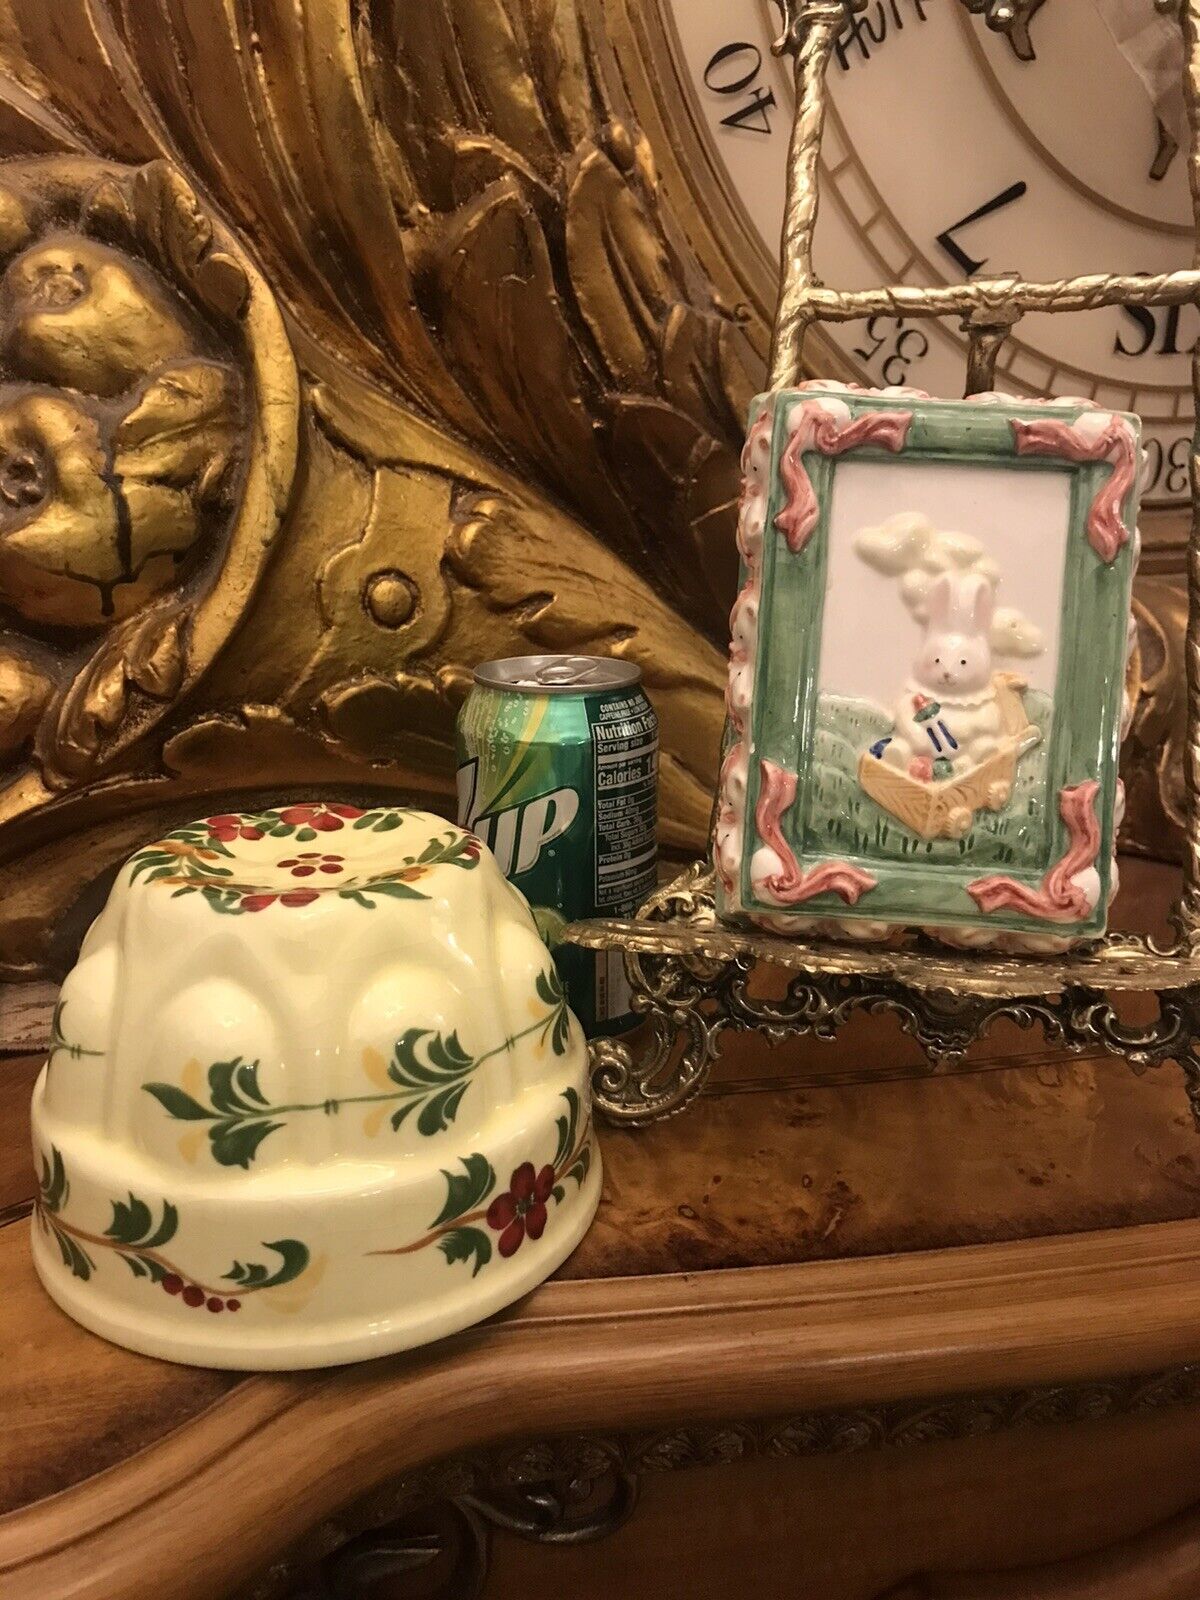 Lot of 2 Jello Molds. Both Hand Painted. One with Floral and one with Bunny. G2.